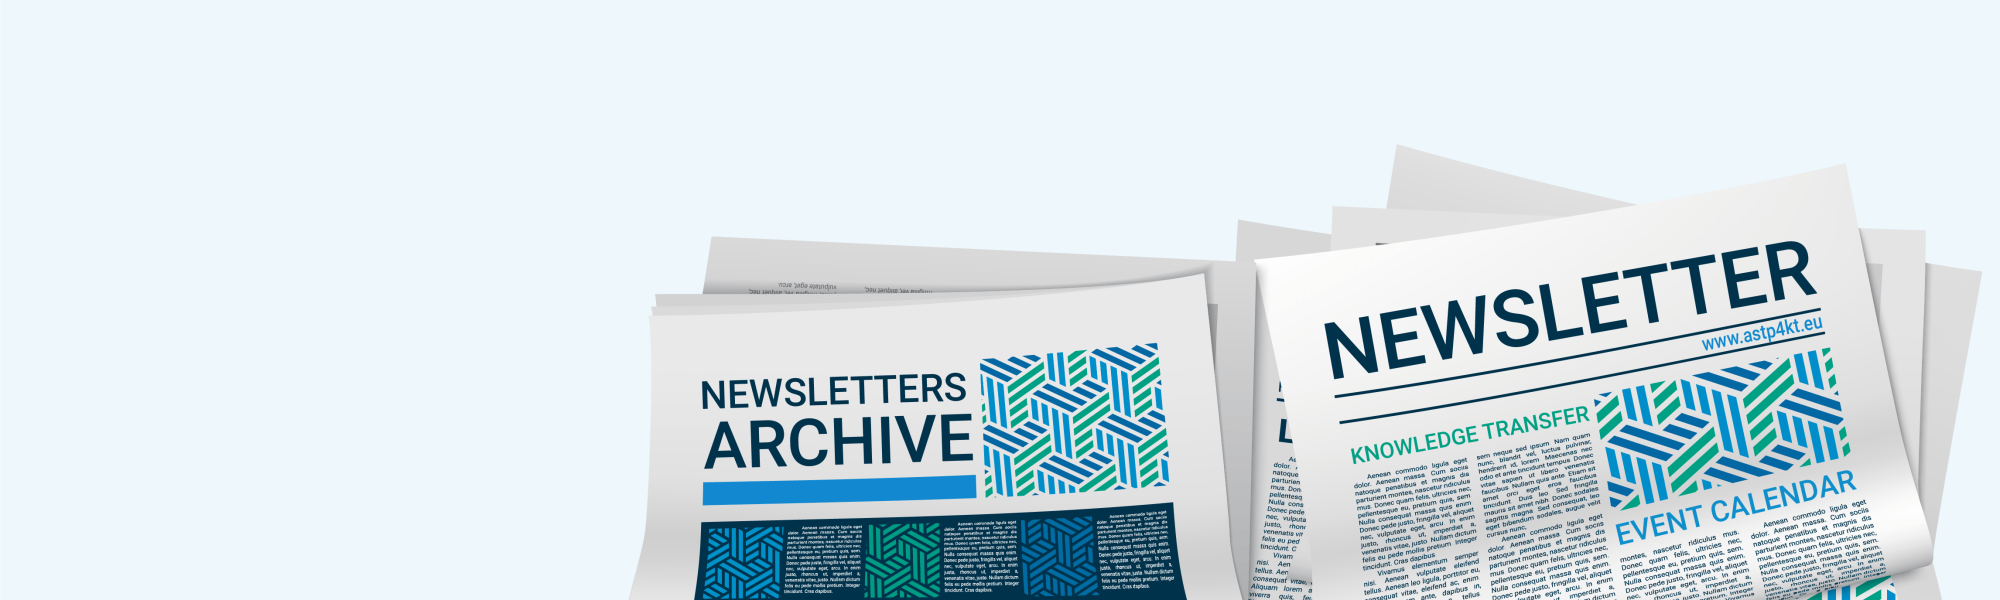 ASTP - Newsletters Archive 2021